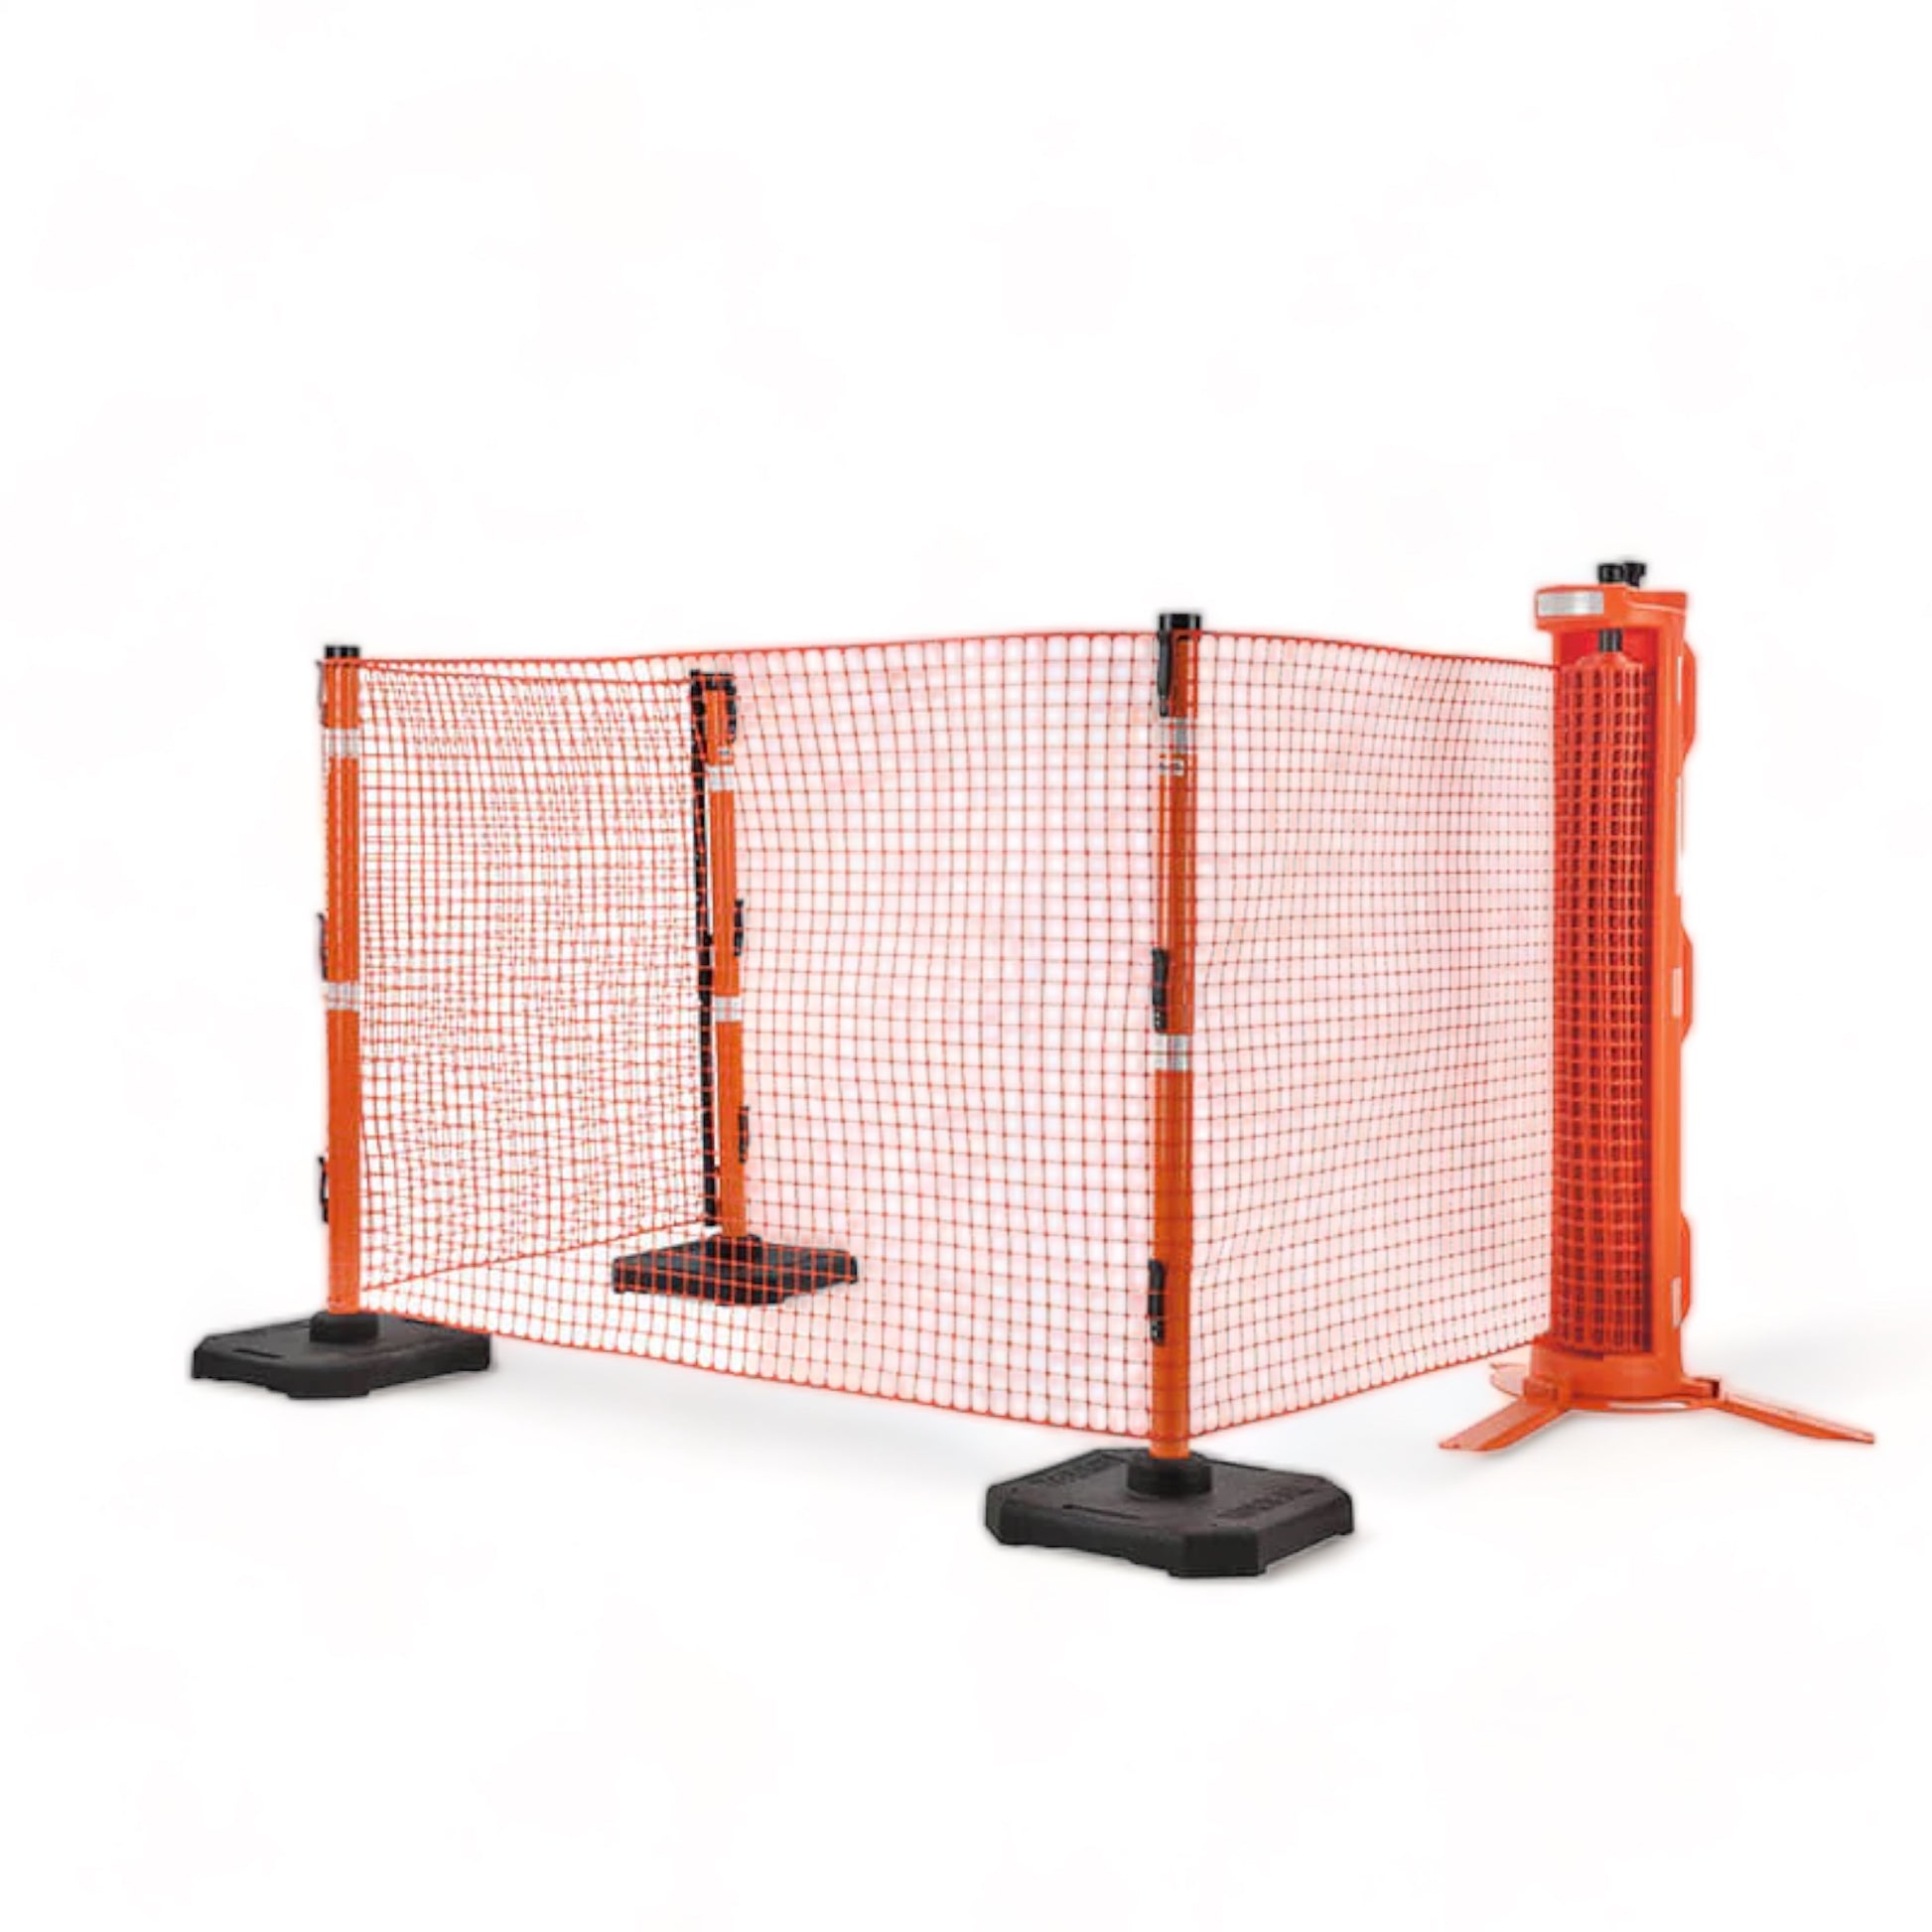 IPS RapidRoll 70-7000 3 Legged Fencing System, 50ft of fencing with 4 posts included